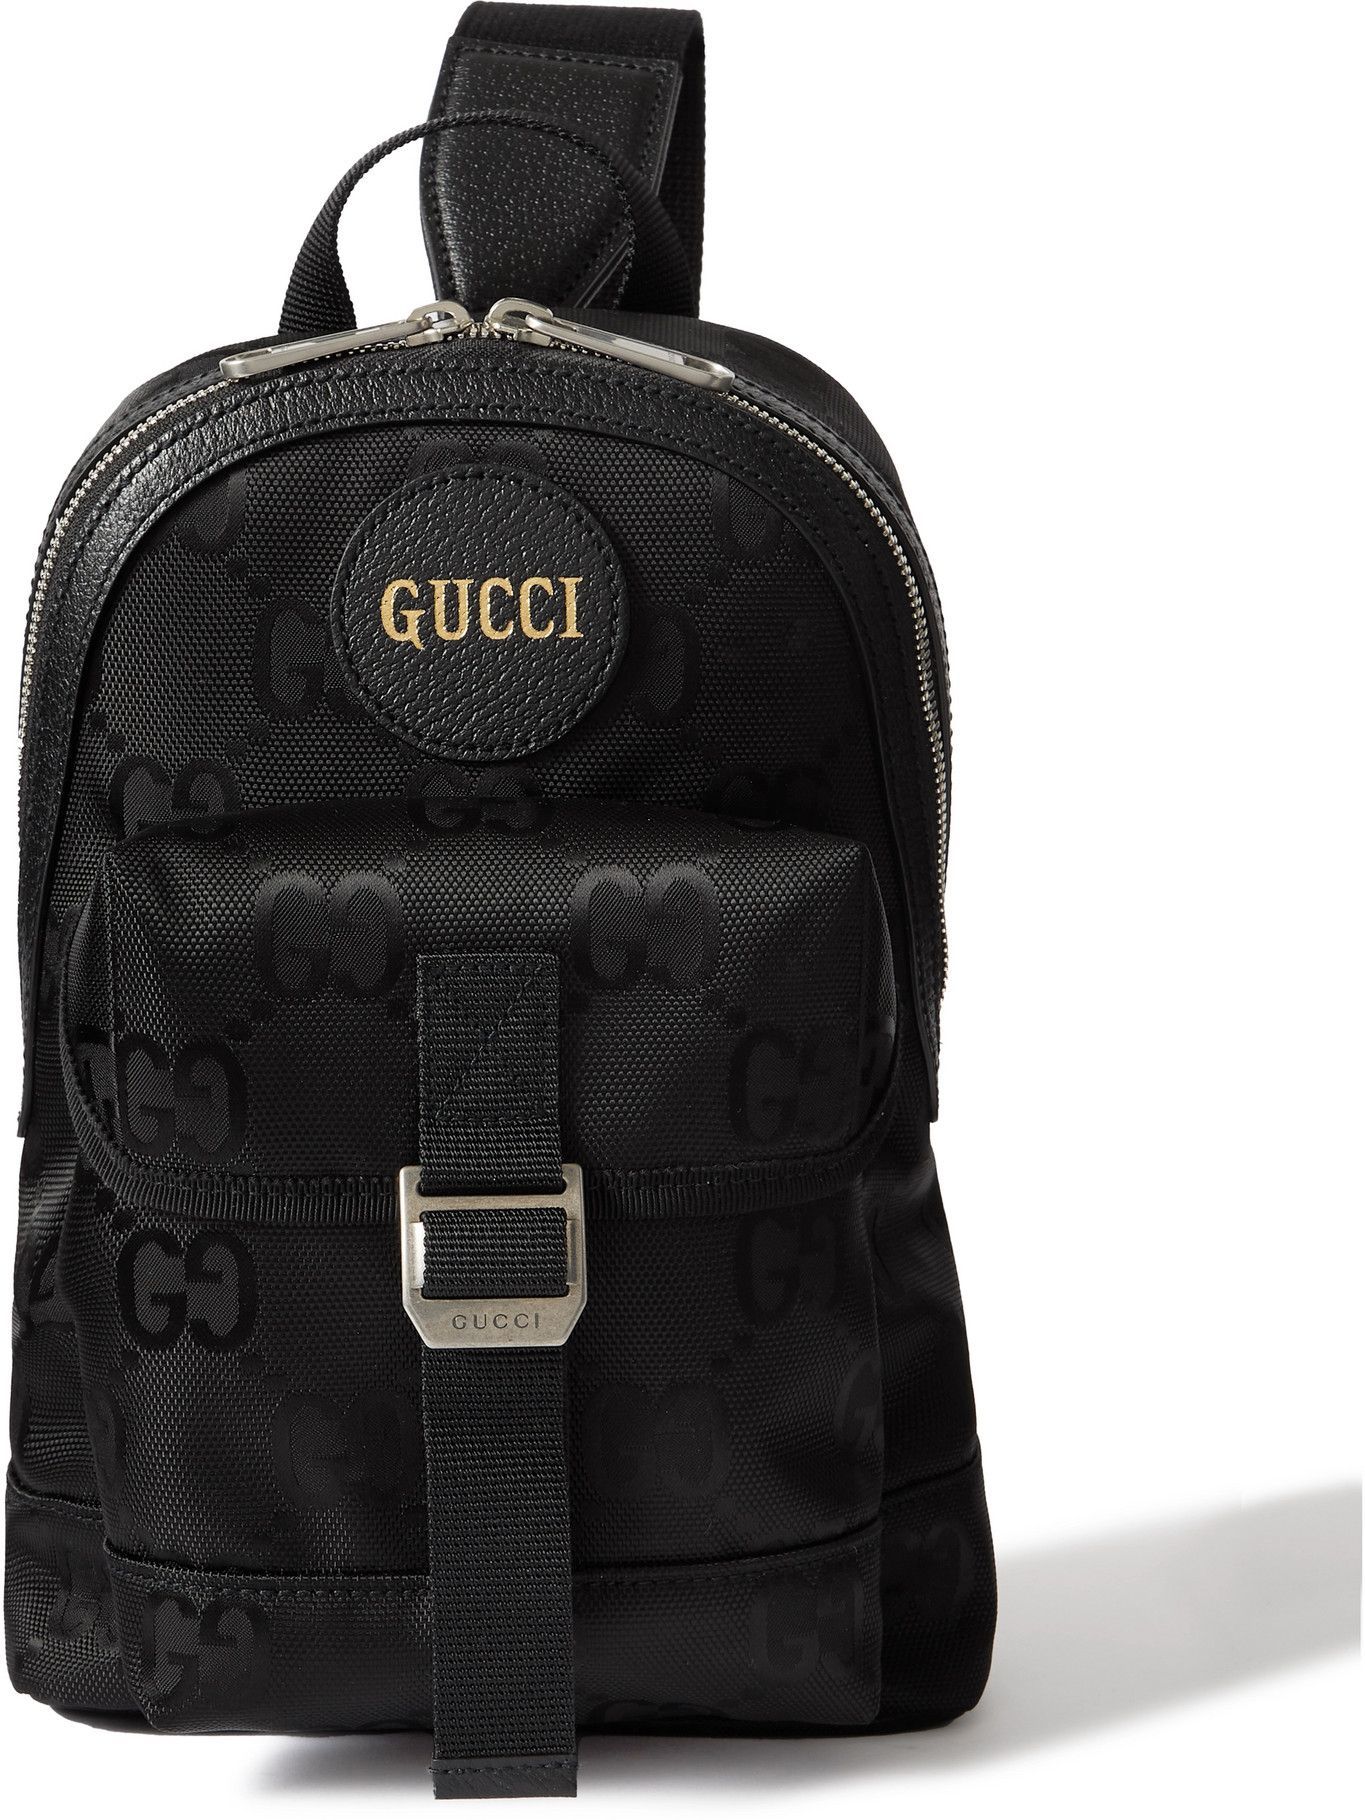 GUCCI - Off the Grid Leather-Trimmed ECONYL Canvas